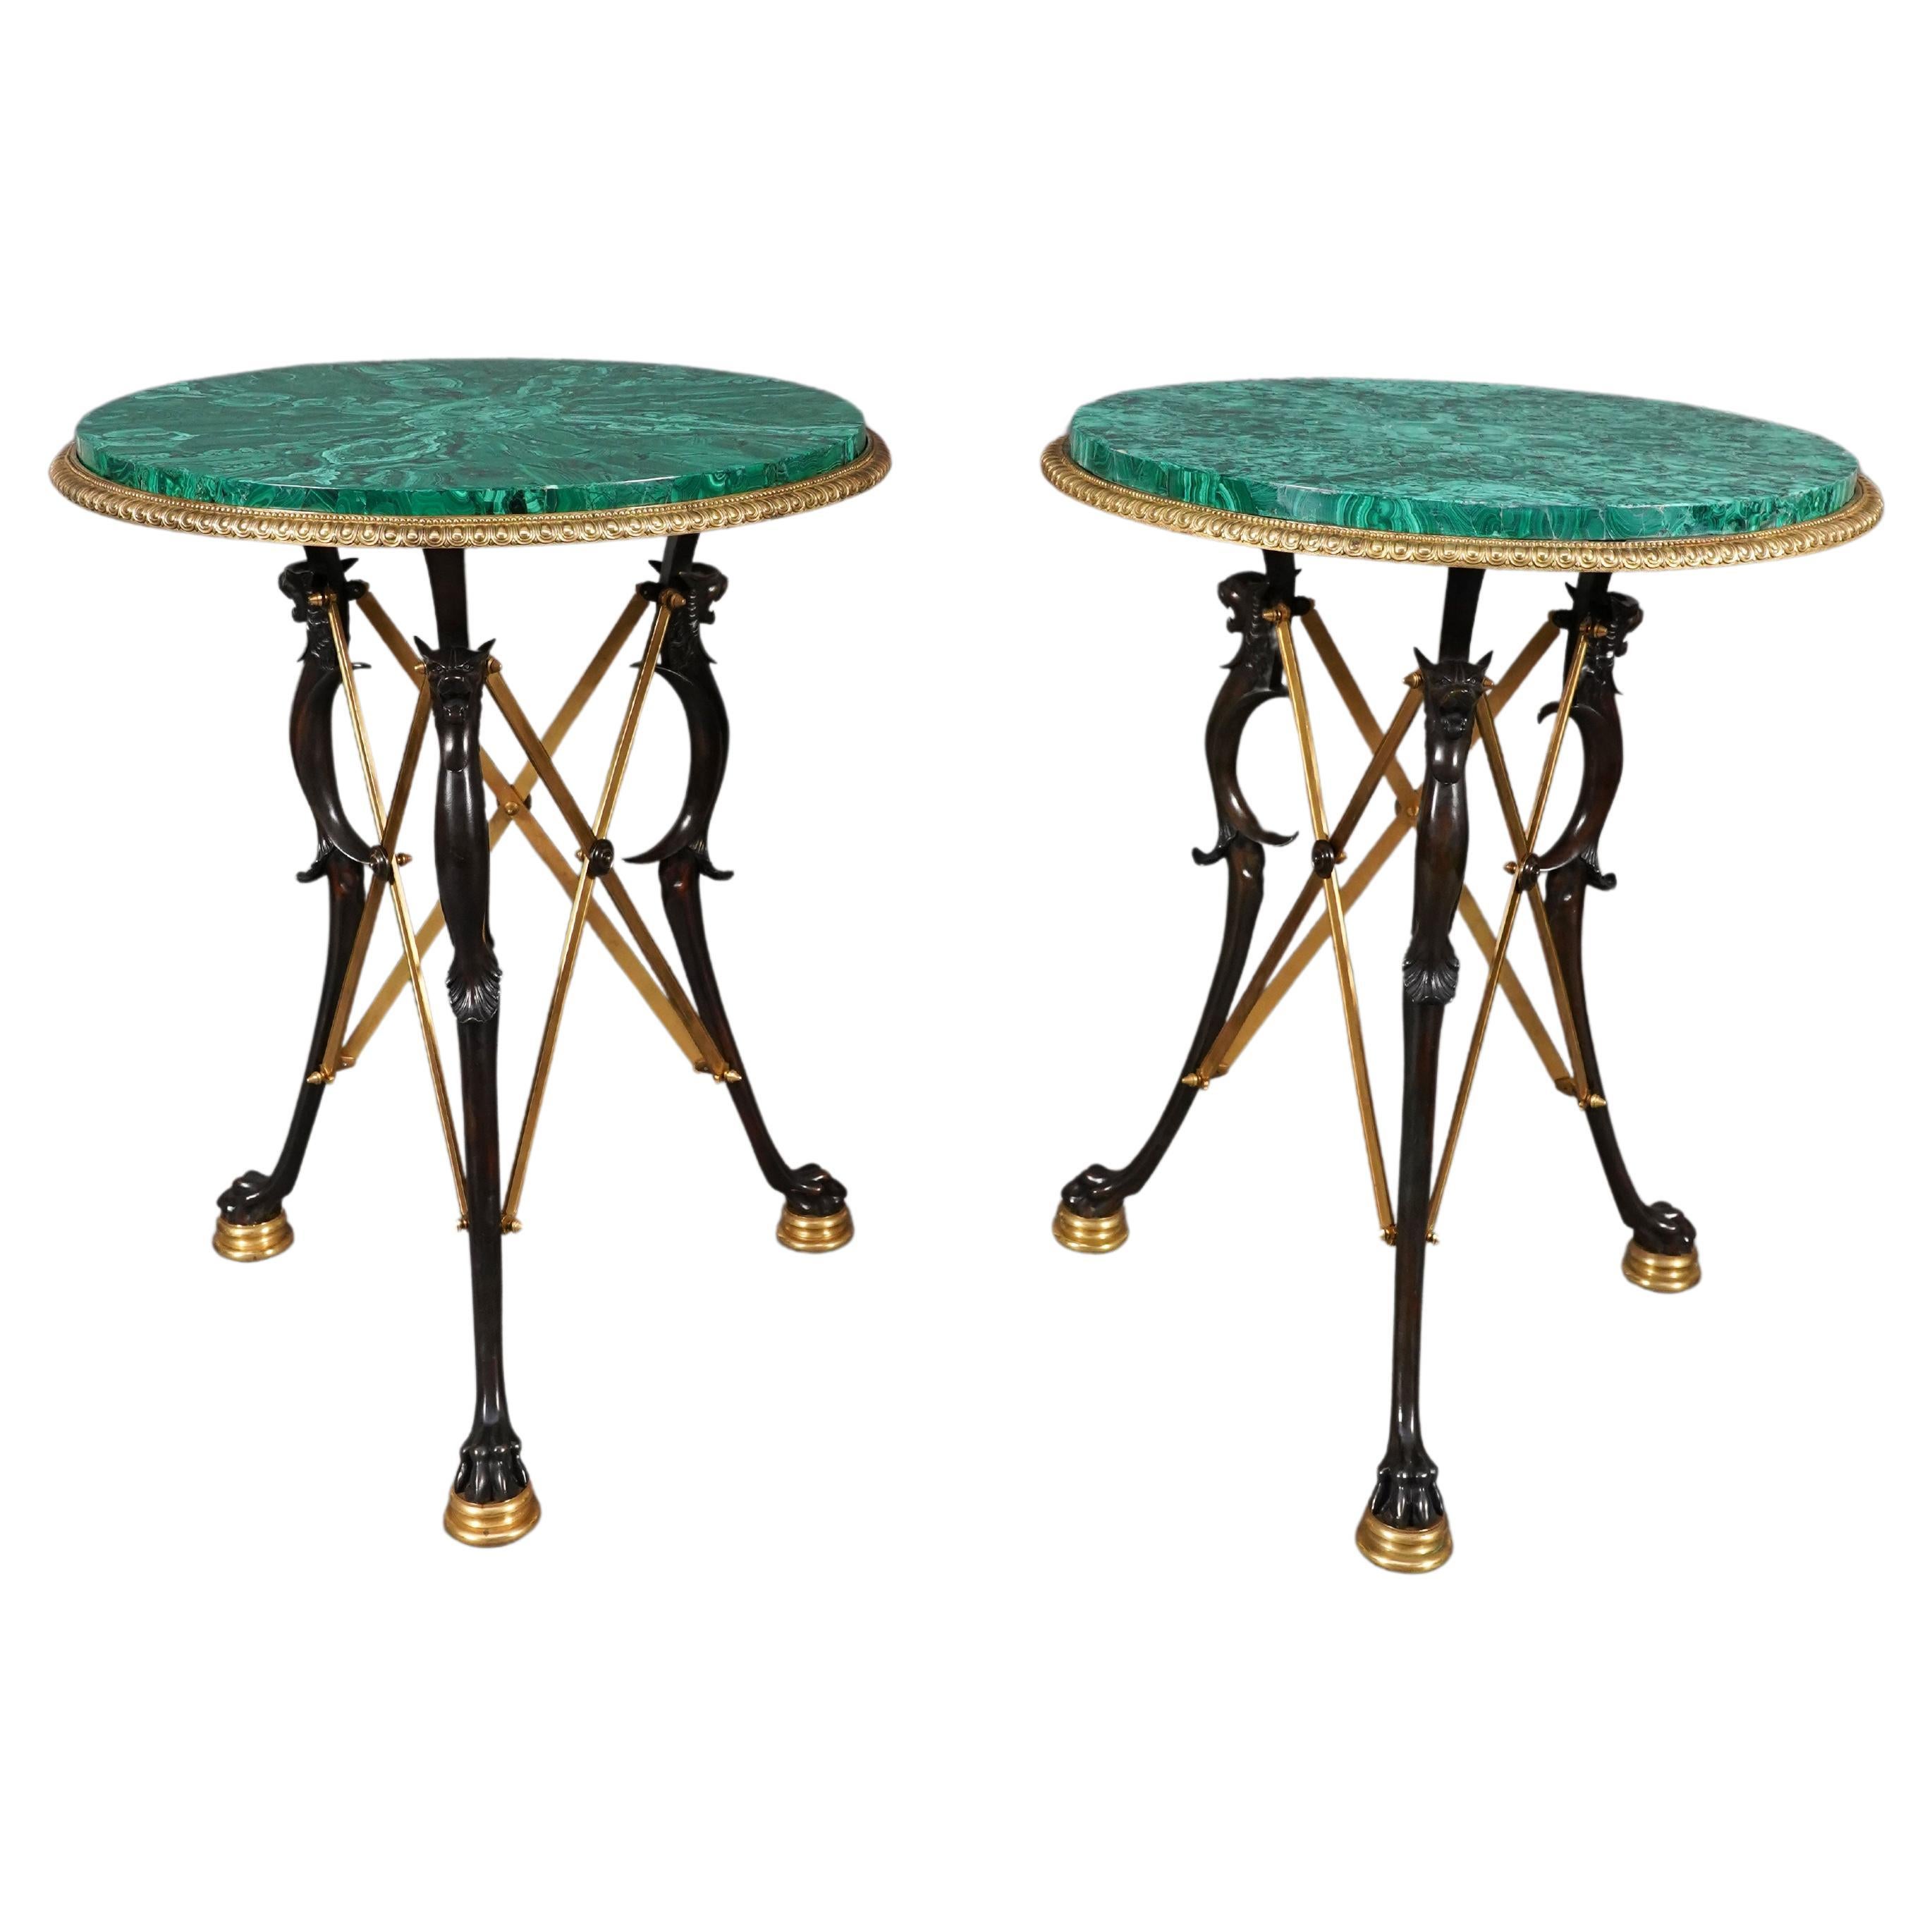 Pair of Neo-Pompeian Gueridons Malachite top , by H. Picard, France, c. 1865 For Sale